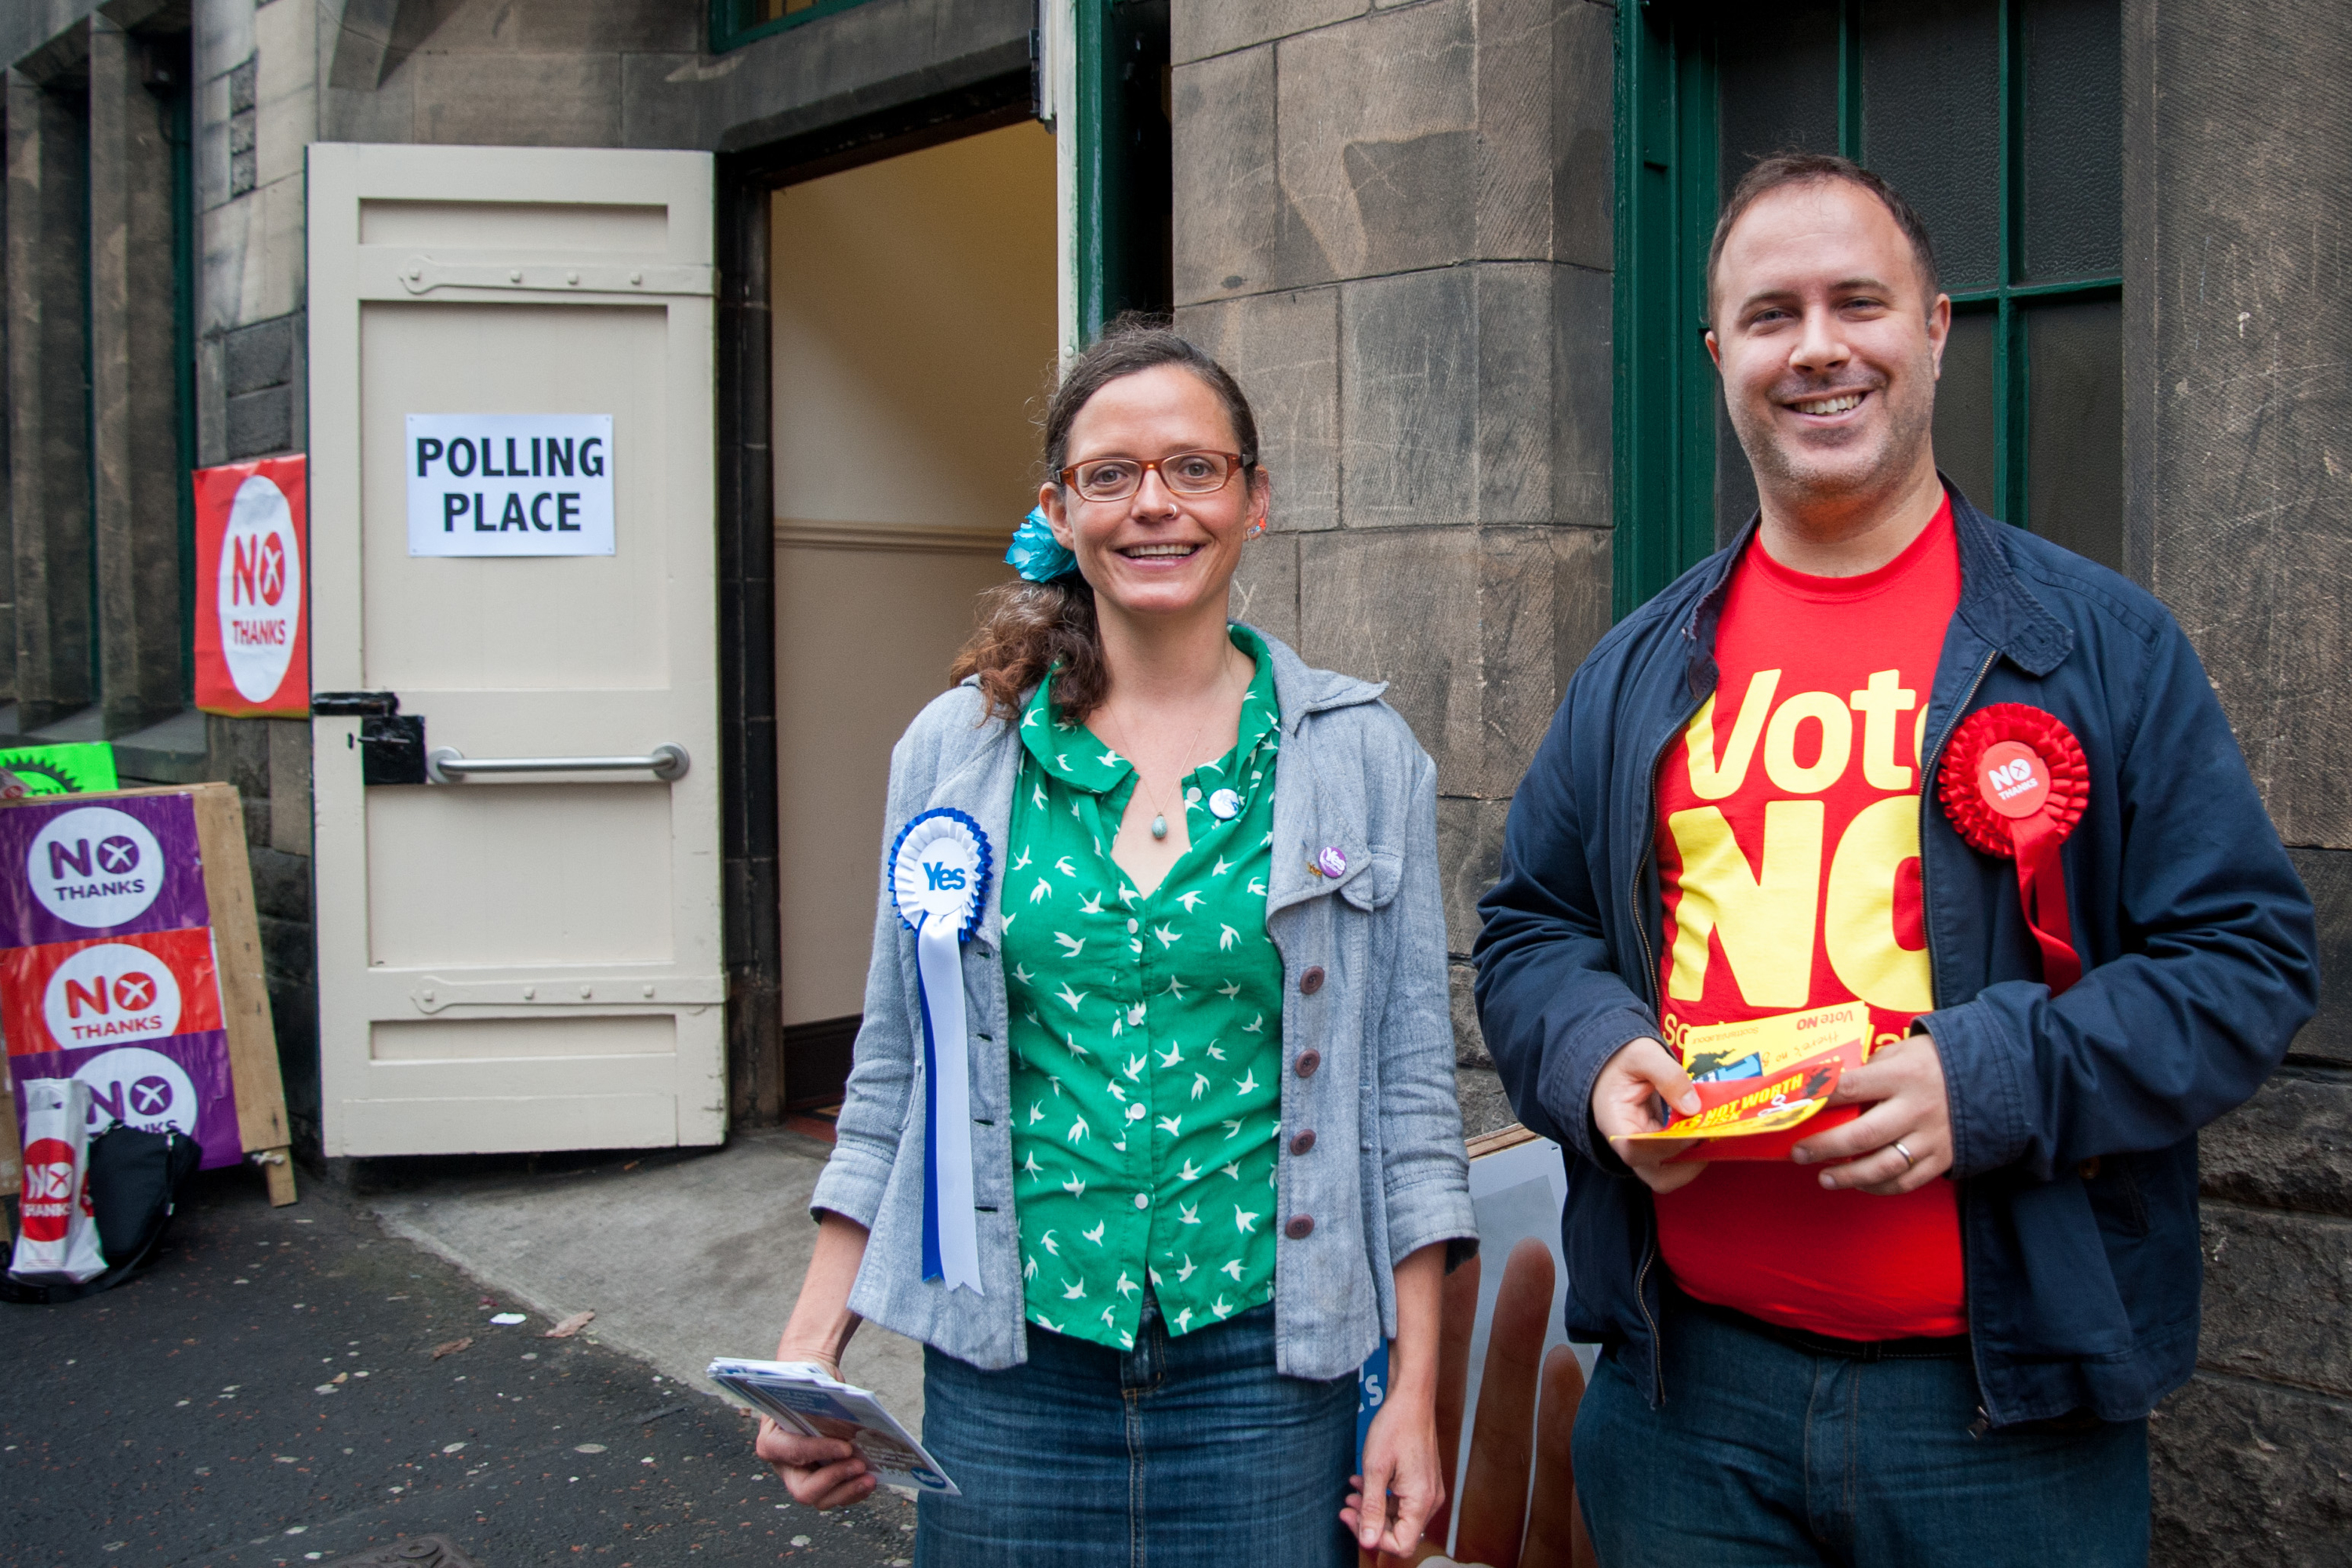 Yes and No campaigners at a polling station in Easter Road, Edinburgh.